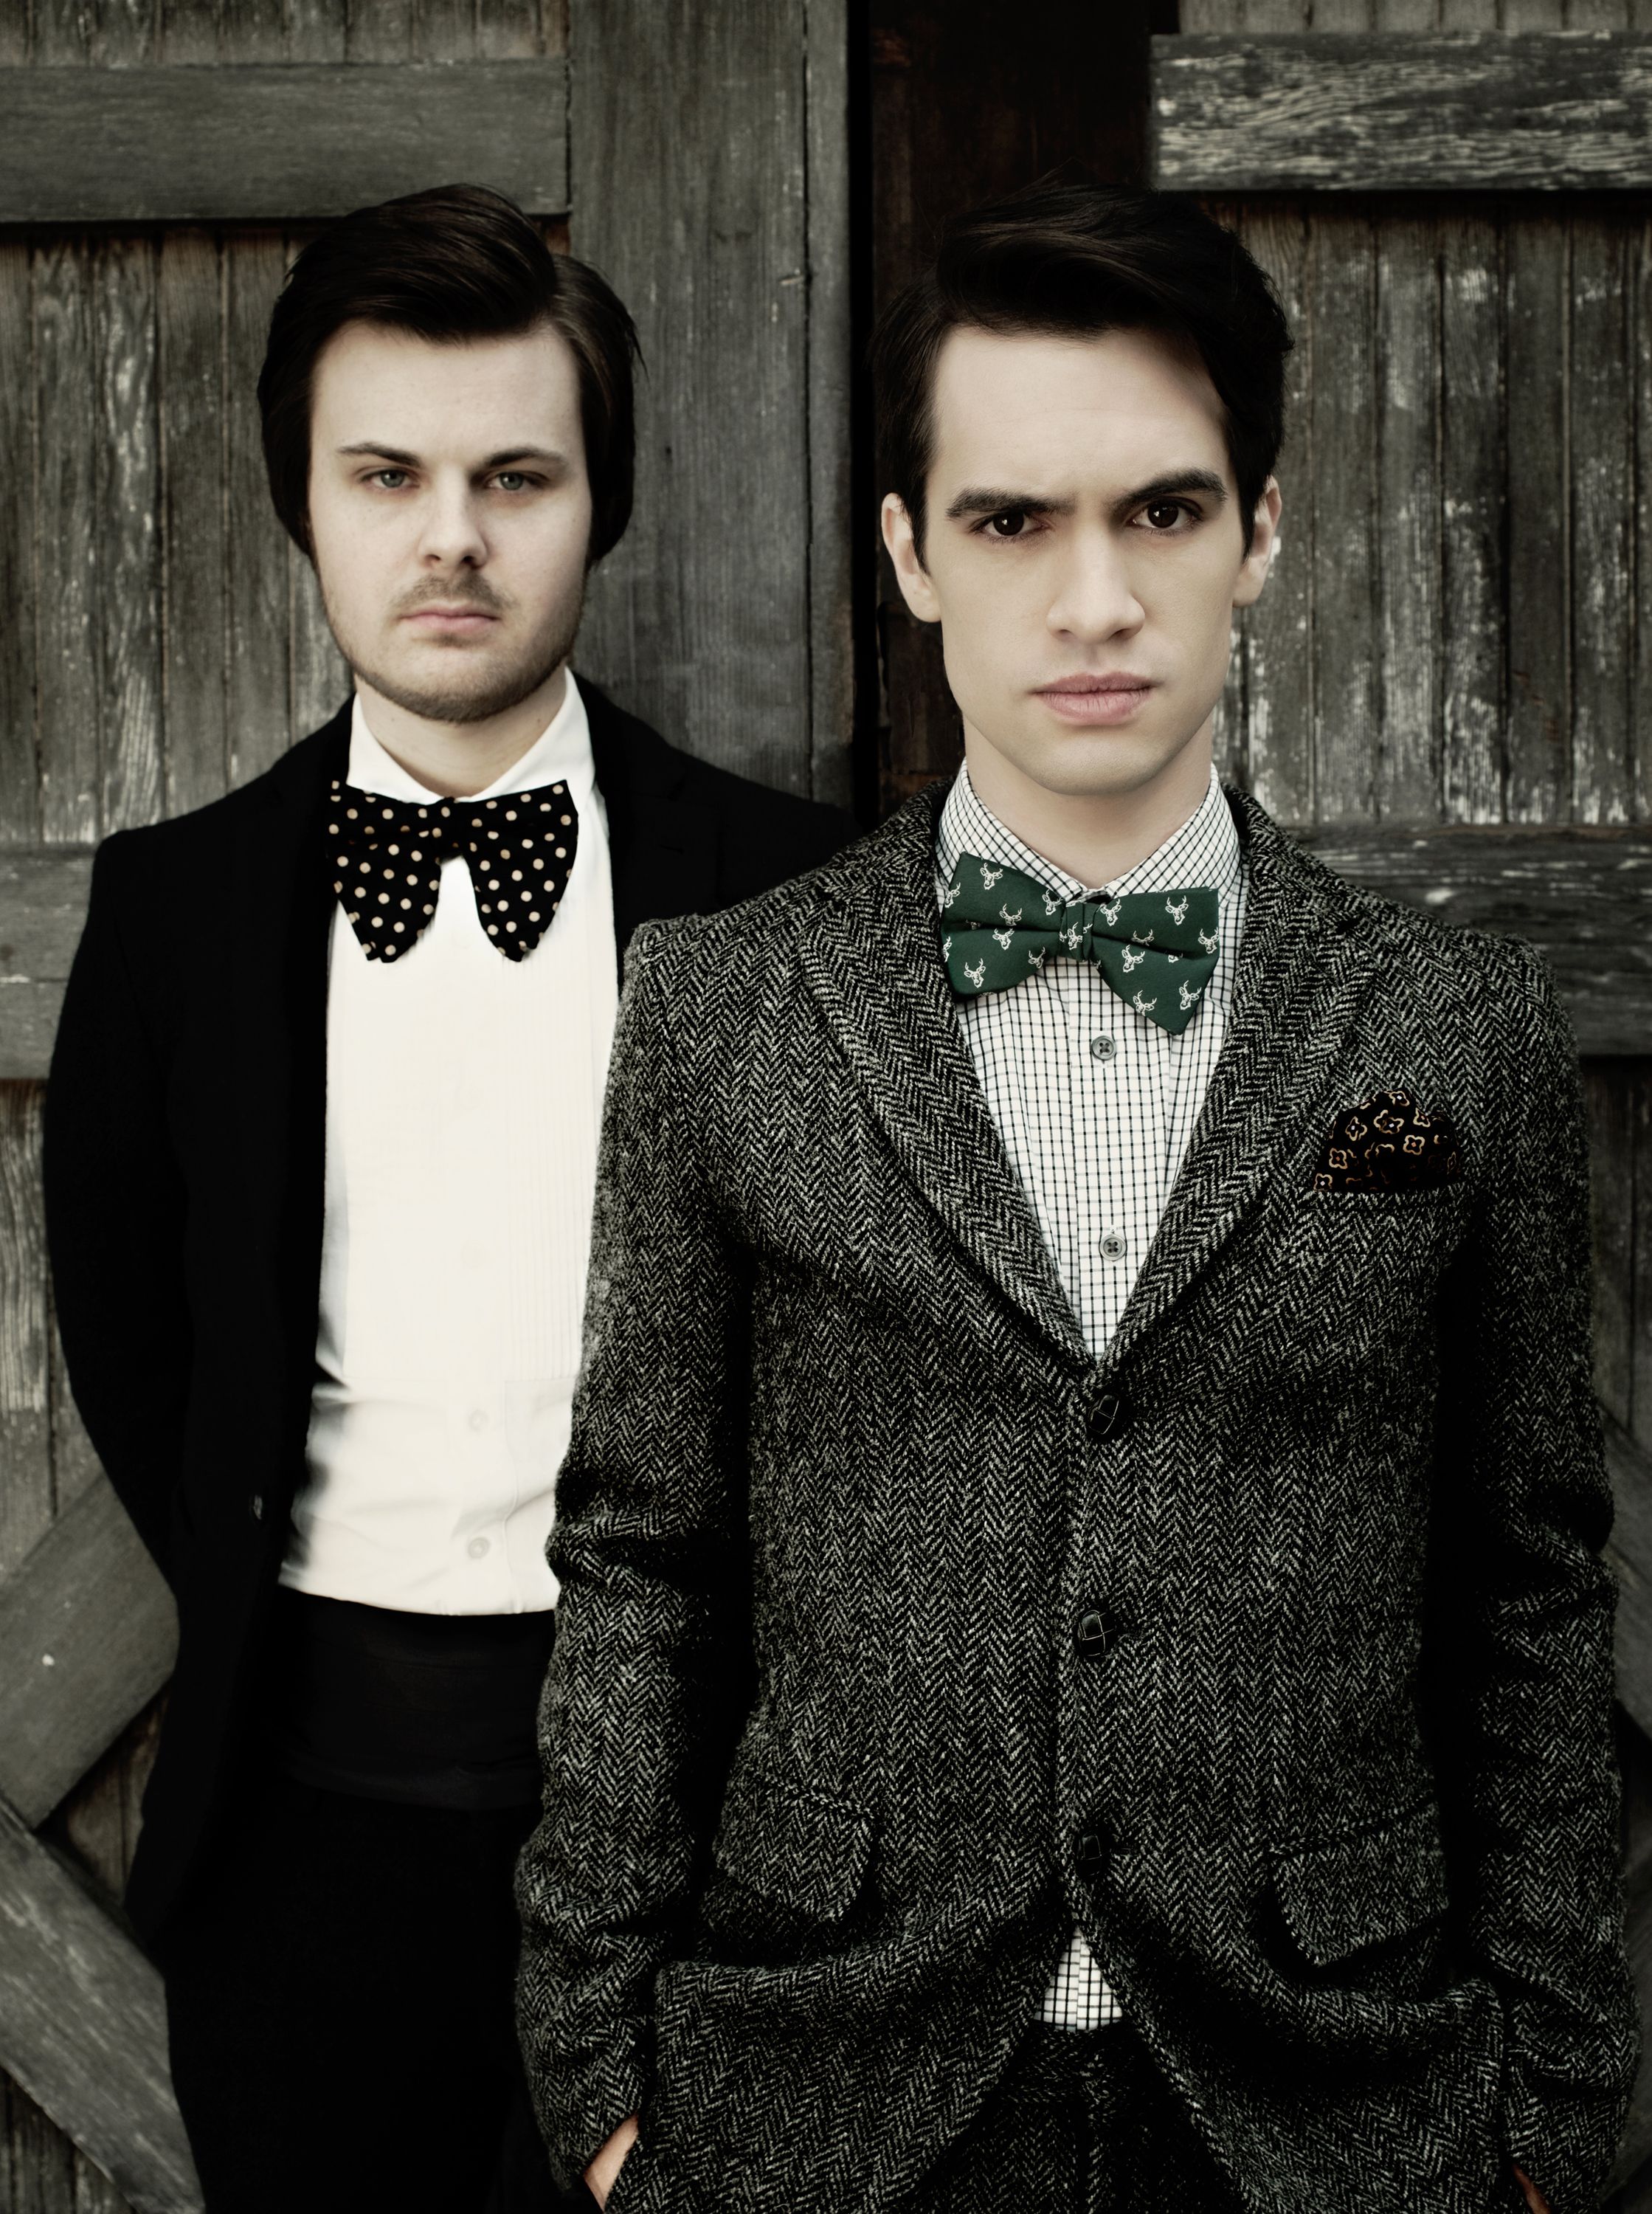 panic at the disco discography ranked